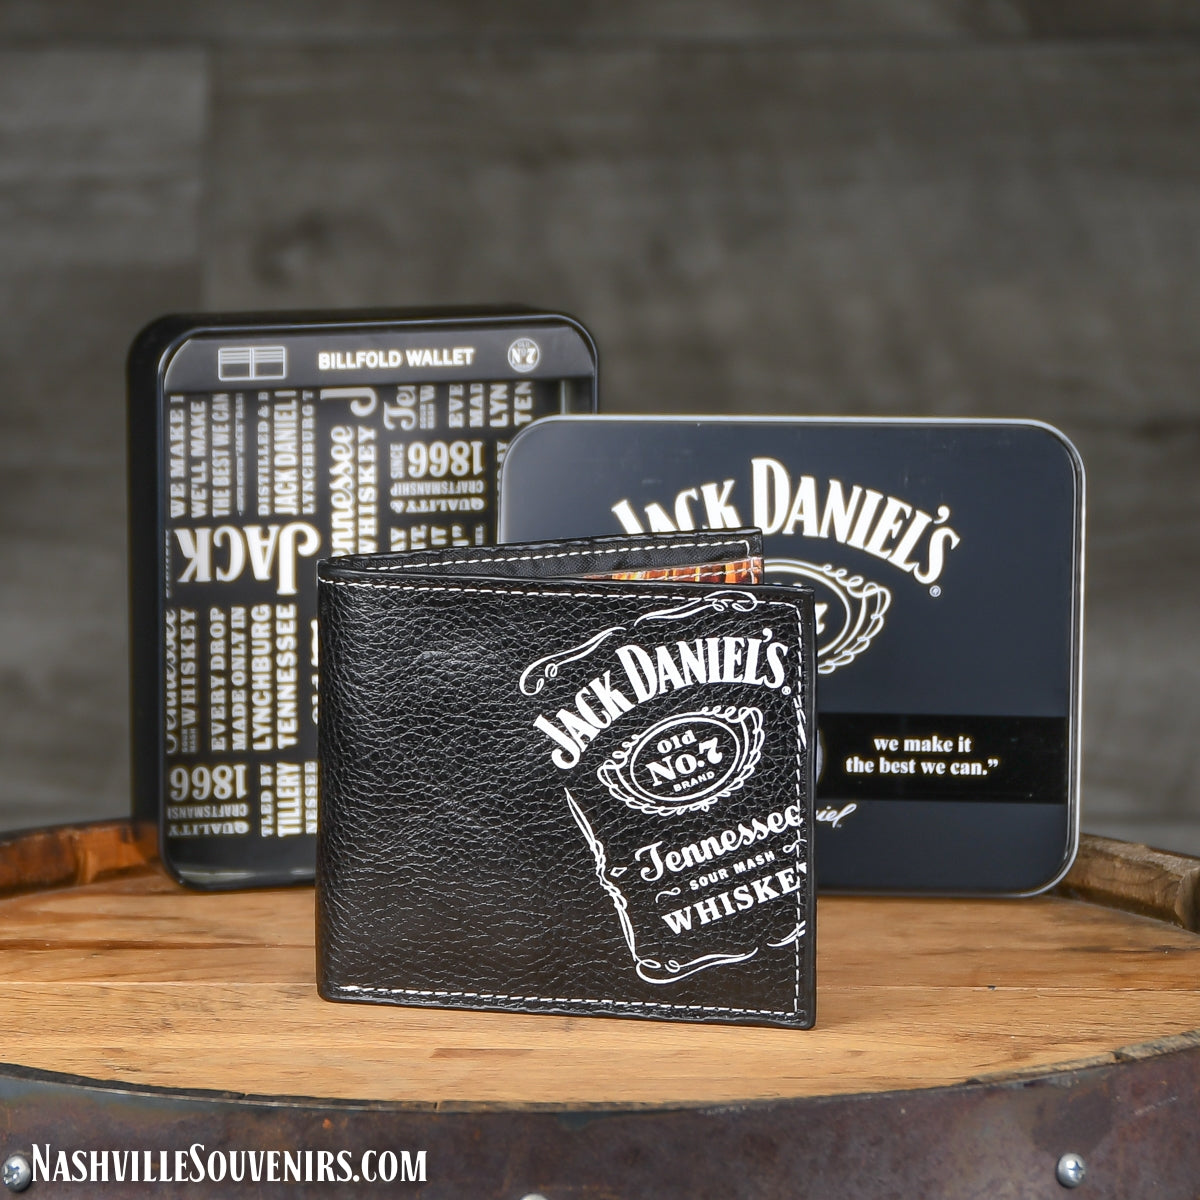 Officially licensed Tennessee Whiskey Jack Daniels Barrelhouse Billfold Wallet. Get one today with FREE SHIPPING on all US orders over $75!